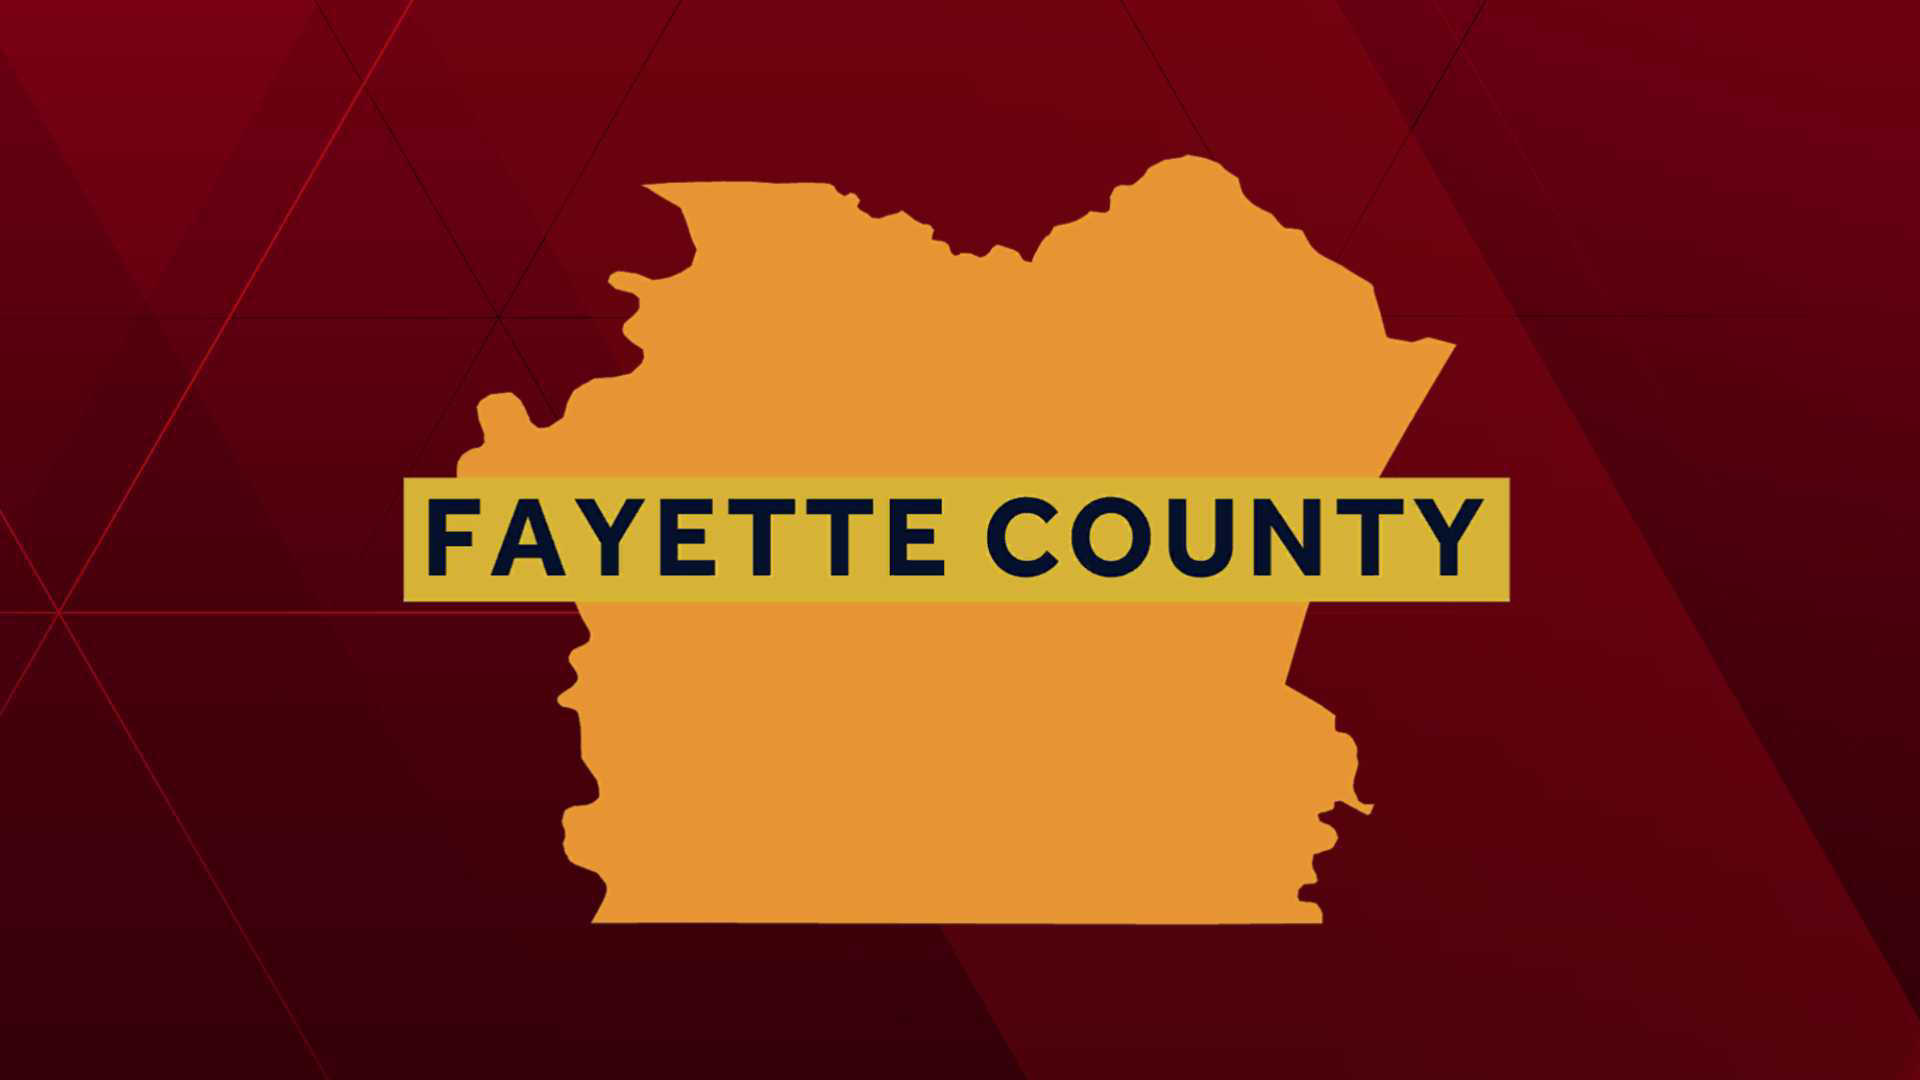 Three people escape house fire in Fayette County